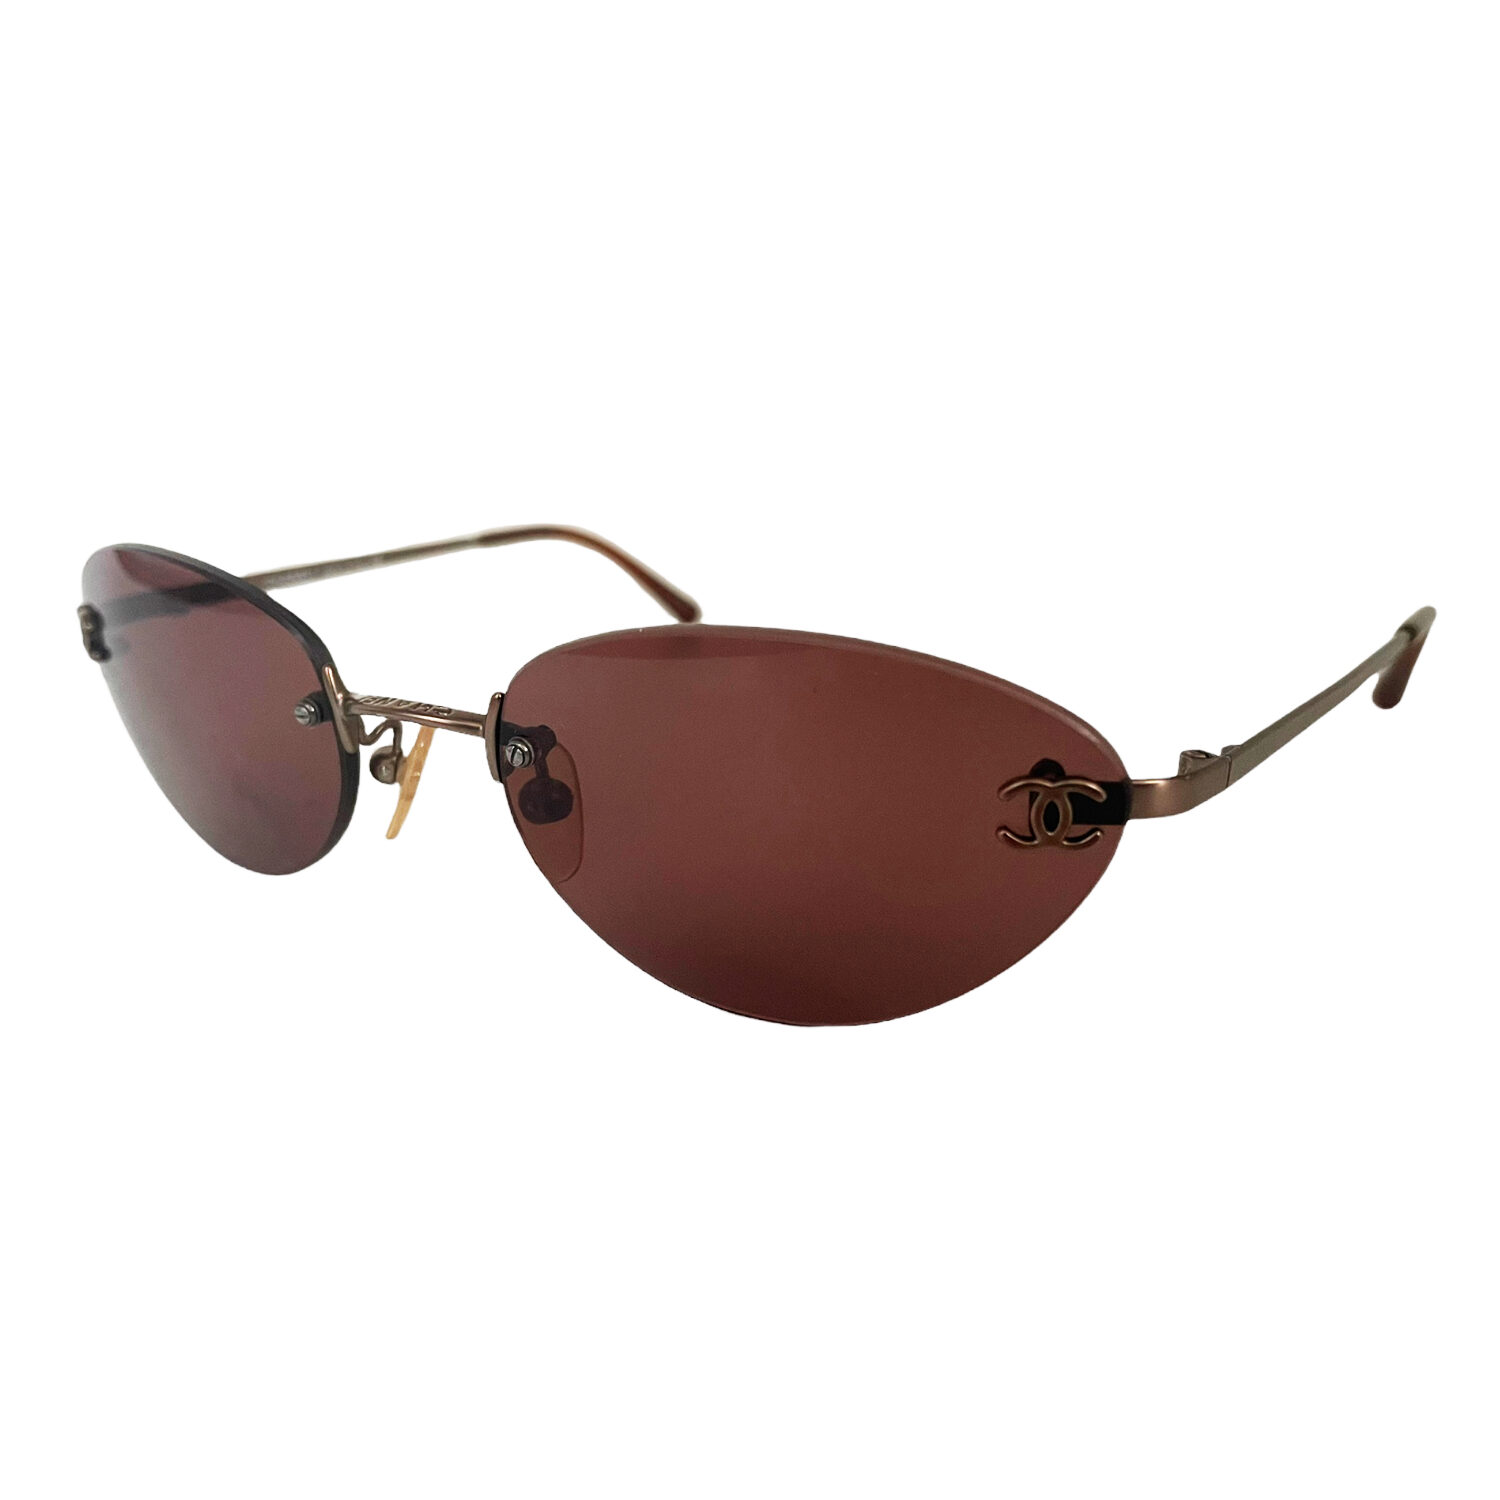 Vintage Chanel Rimless Tinted Sunglasses in Brown | NITRYL